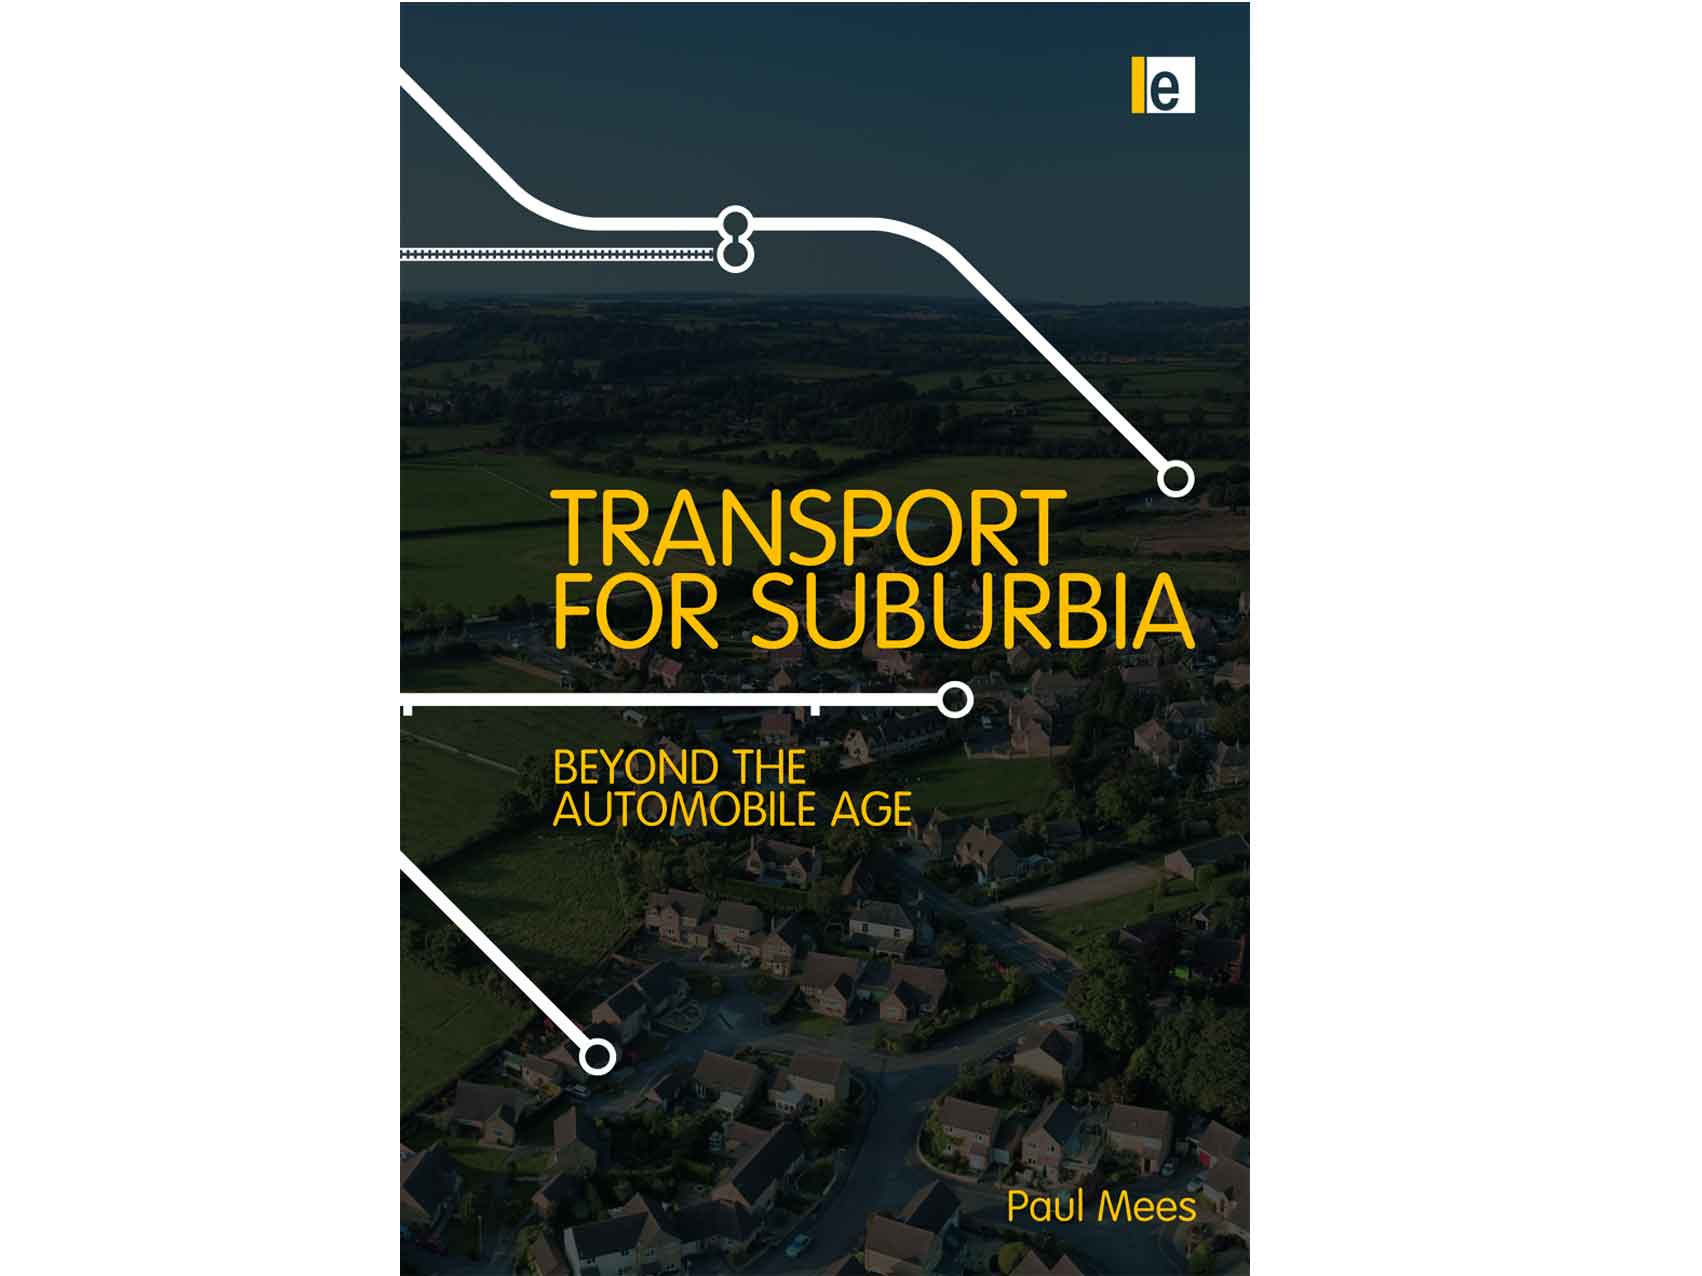 Paul Mess was the author of “Transport for suburbia – beyond the automobile age”